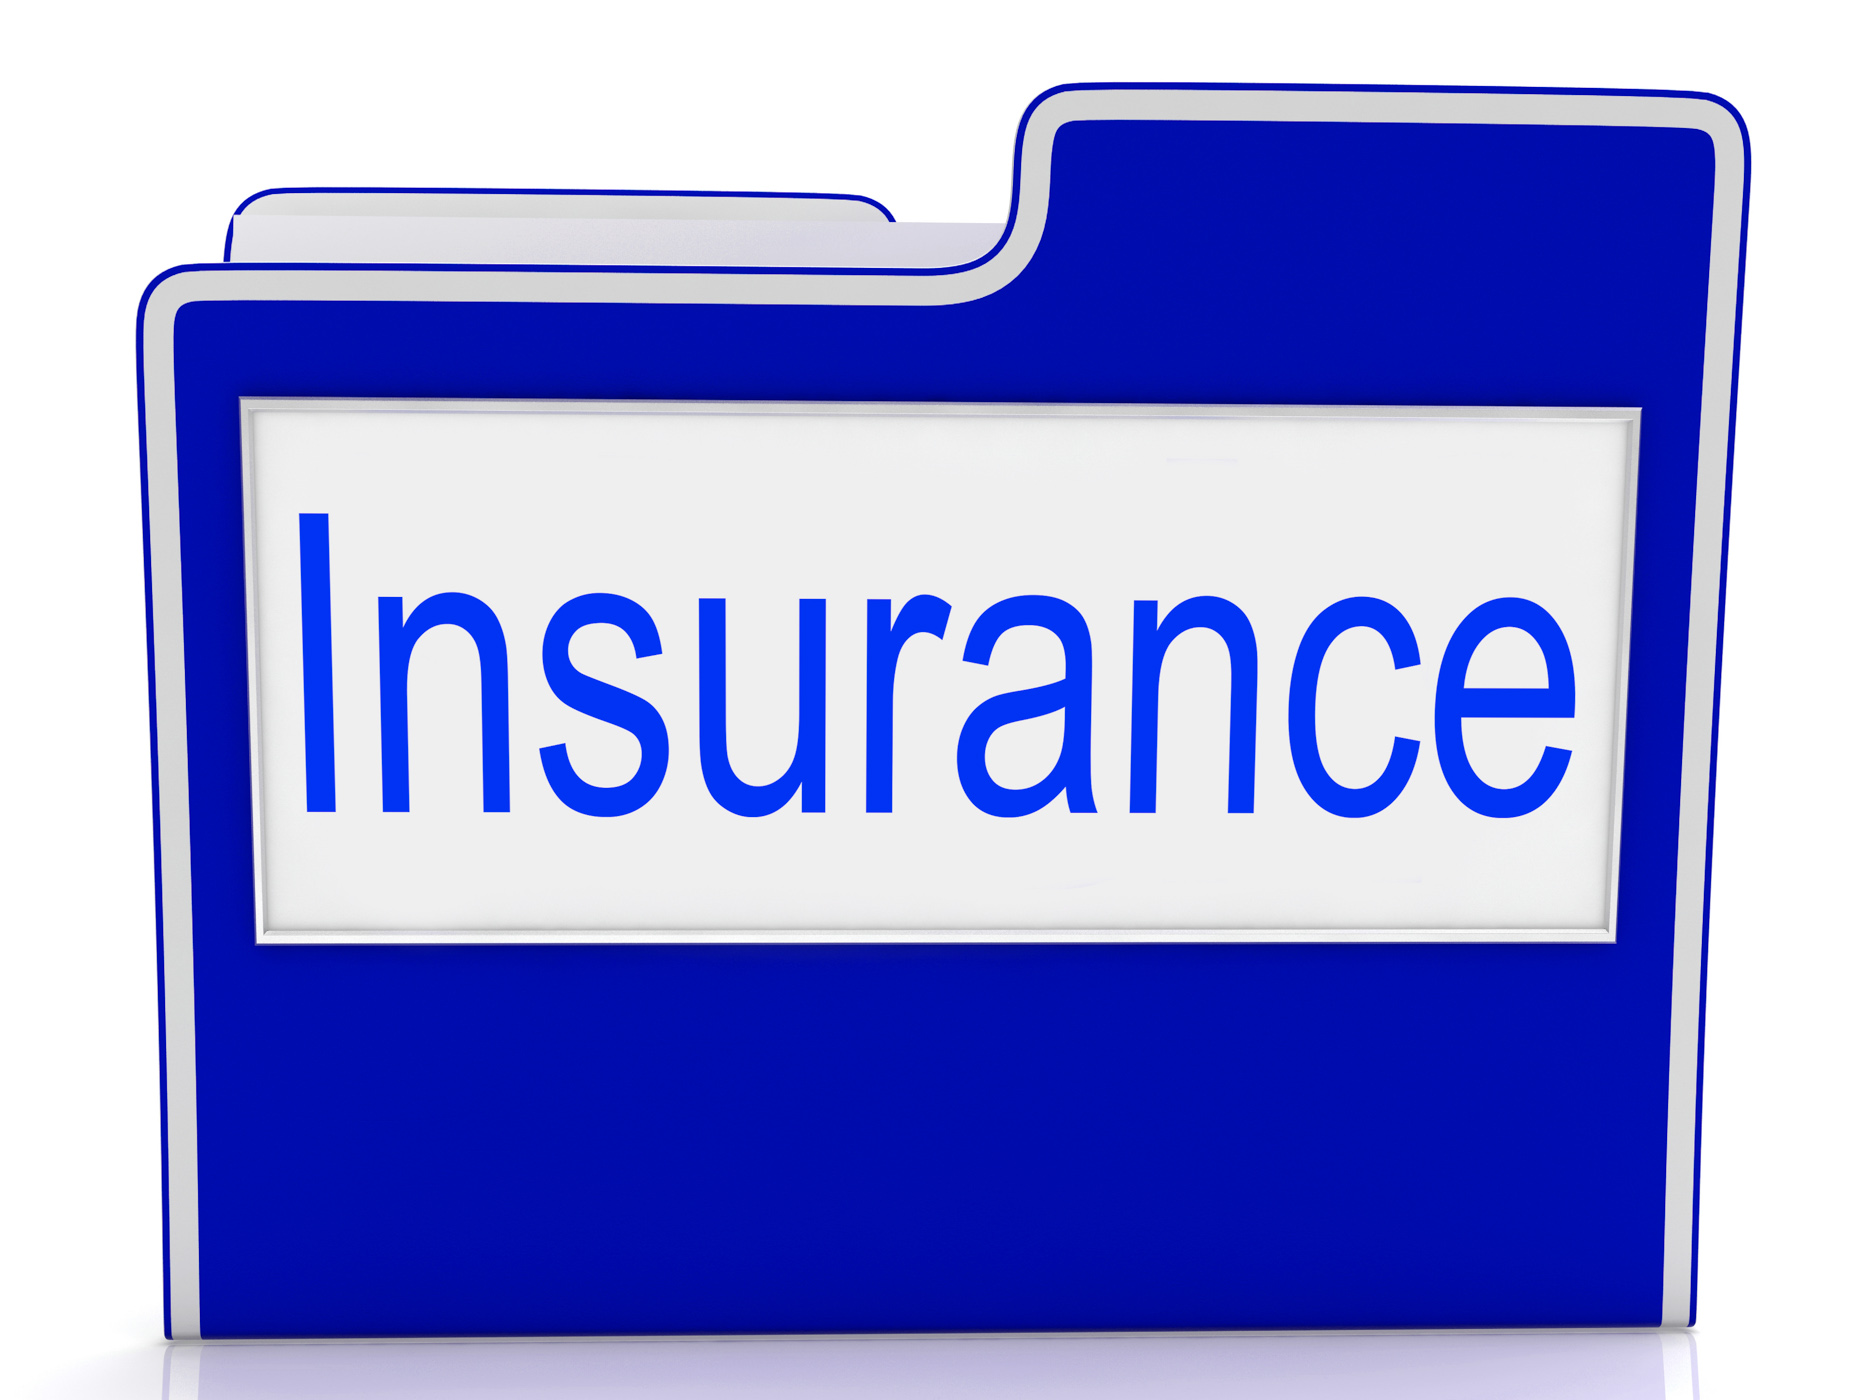 File insurance represents folders administration and insure photo